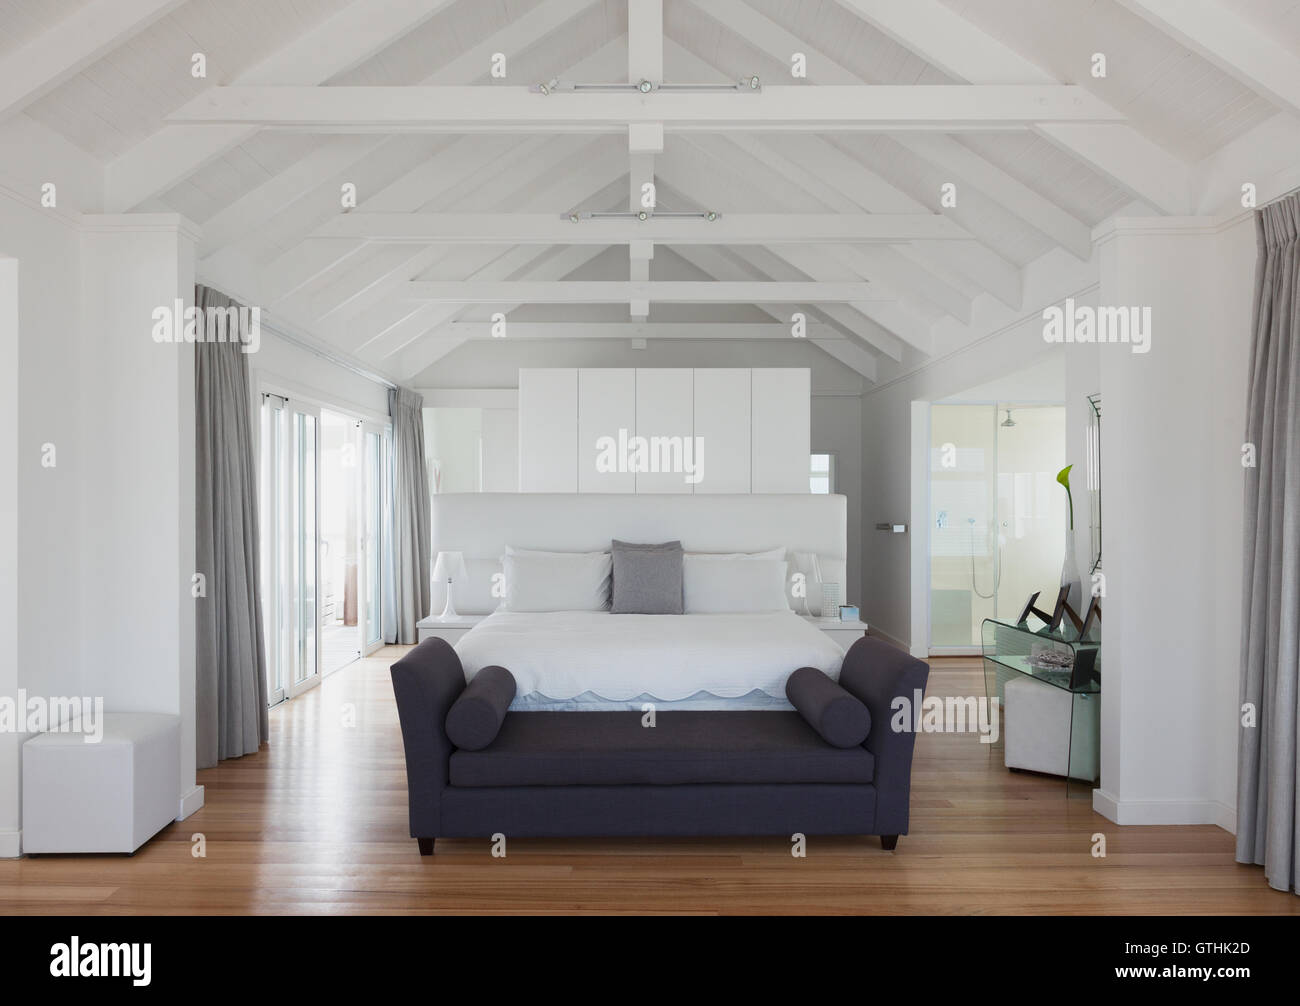 White vaulted wood beam ceiling over bed in home showcase interior Stock Photo